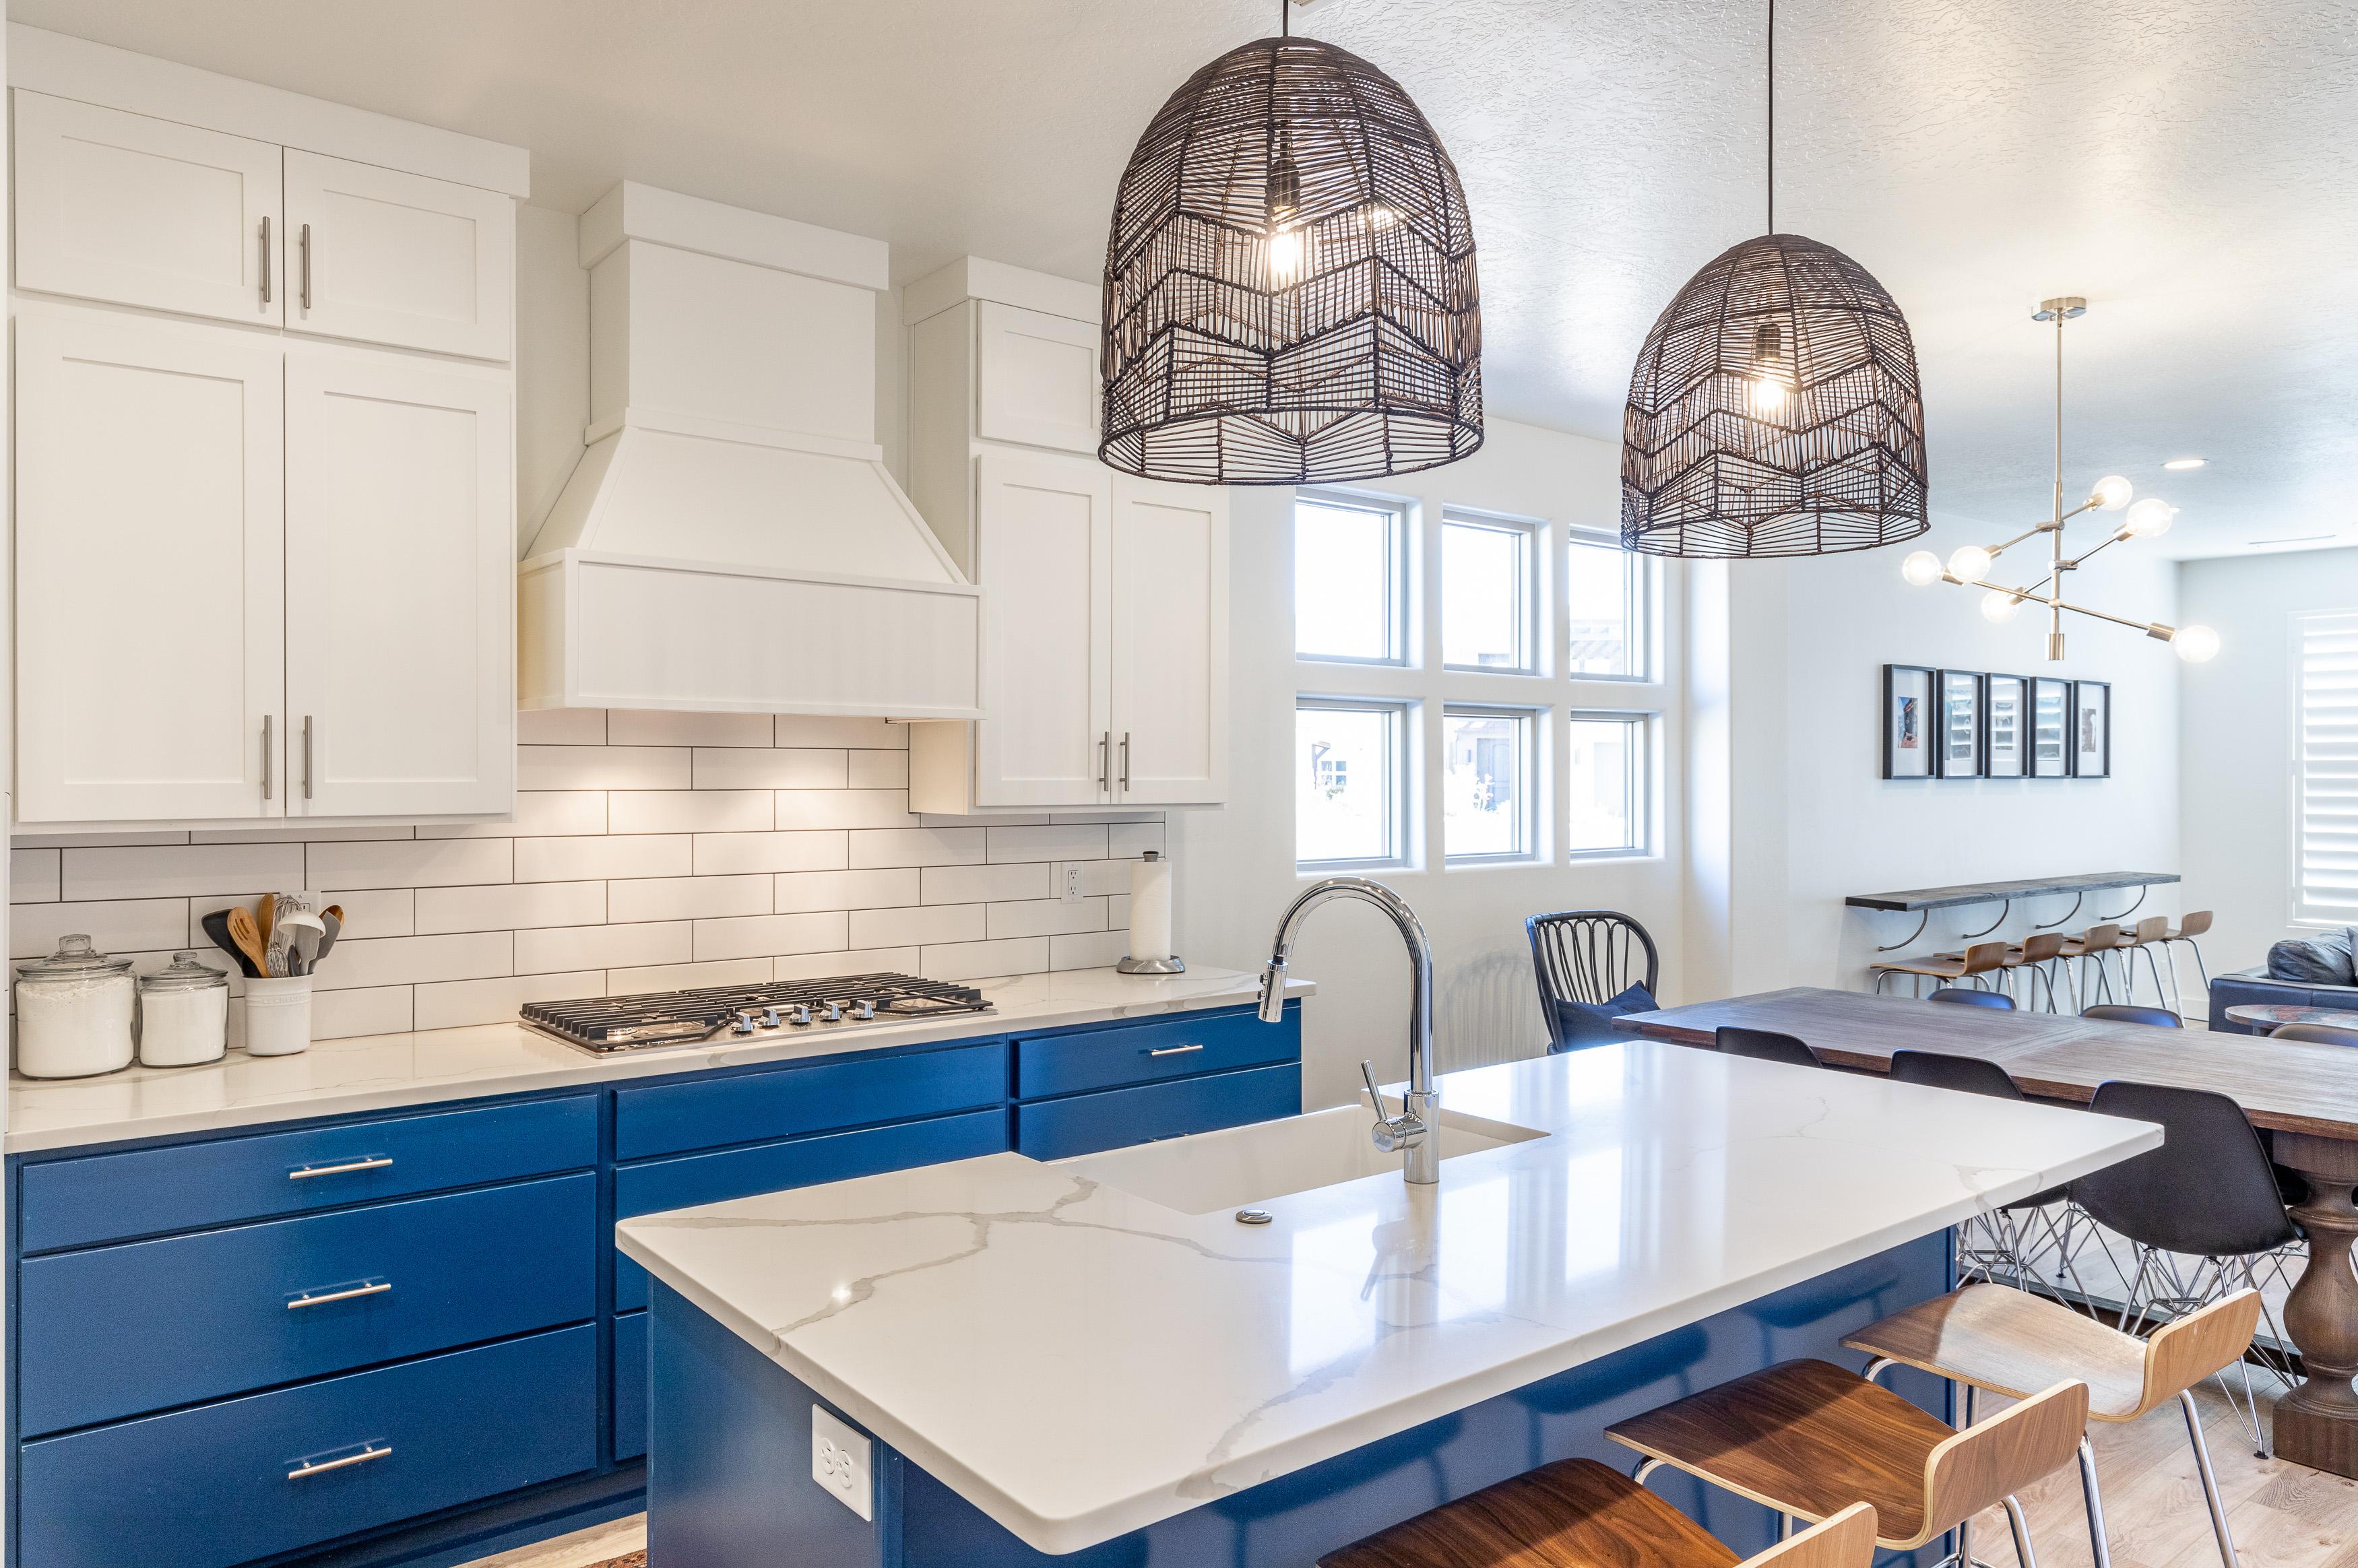 This sleek, modern kitchen has all the best upgrades to make cooking a breeze!